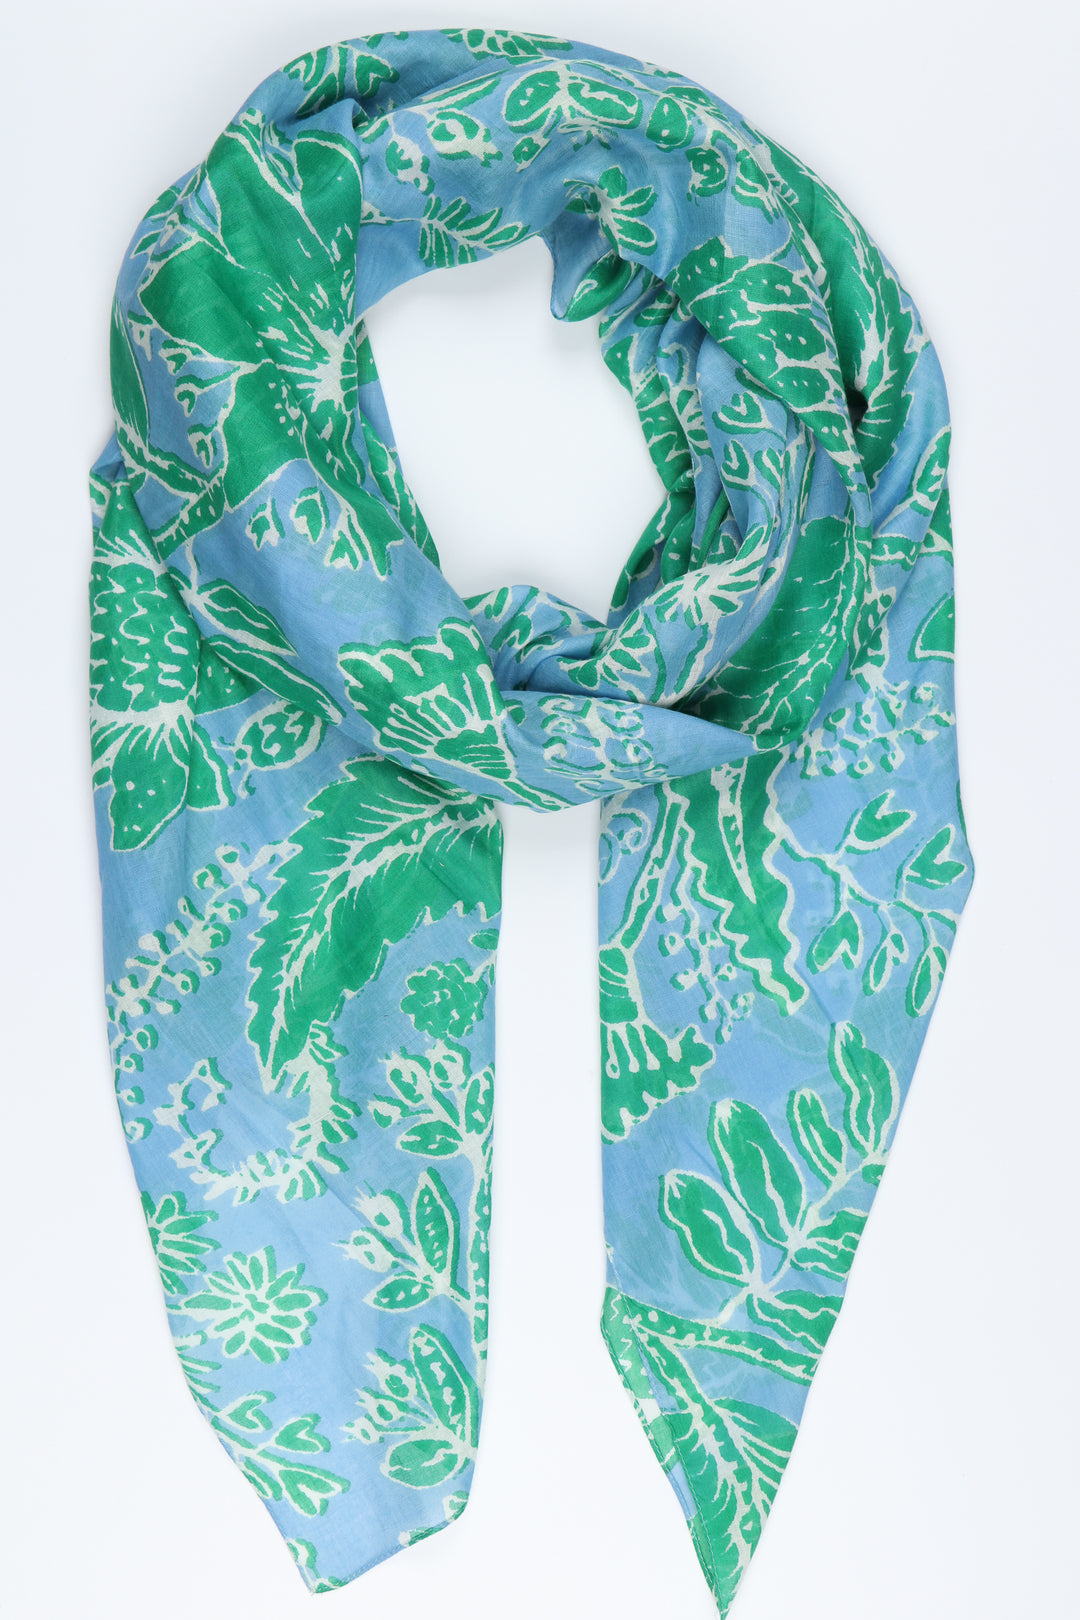 Delicate Floral Print Cotton Scarf in Green Blue